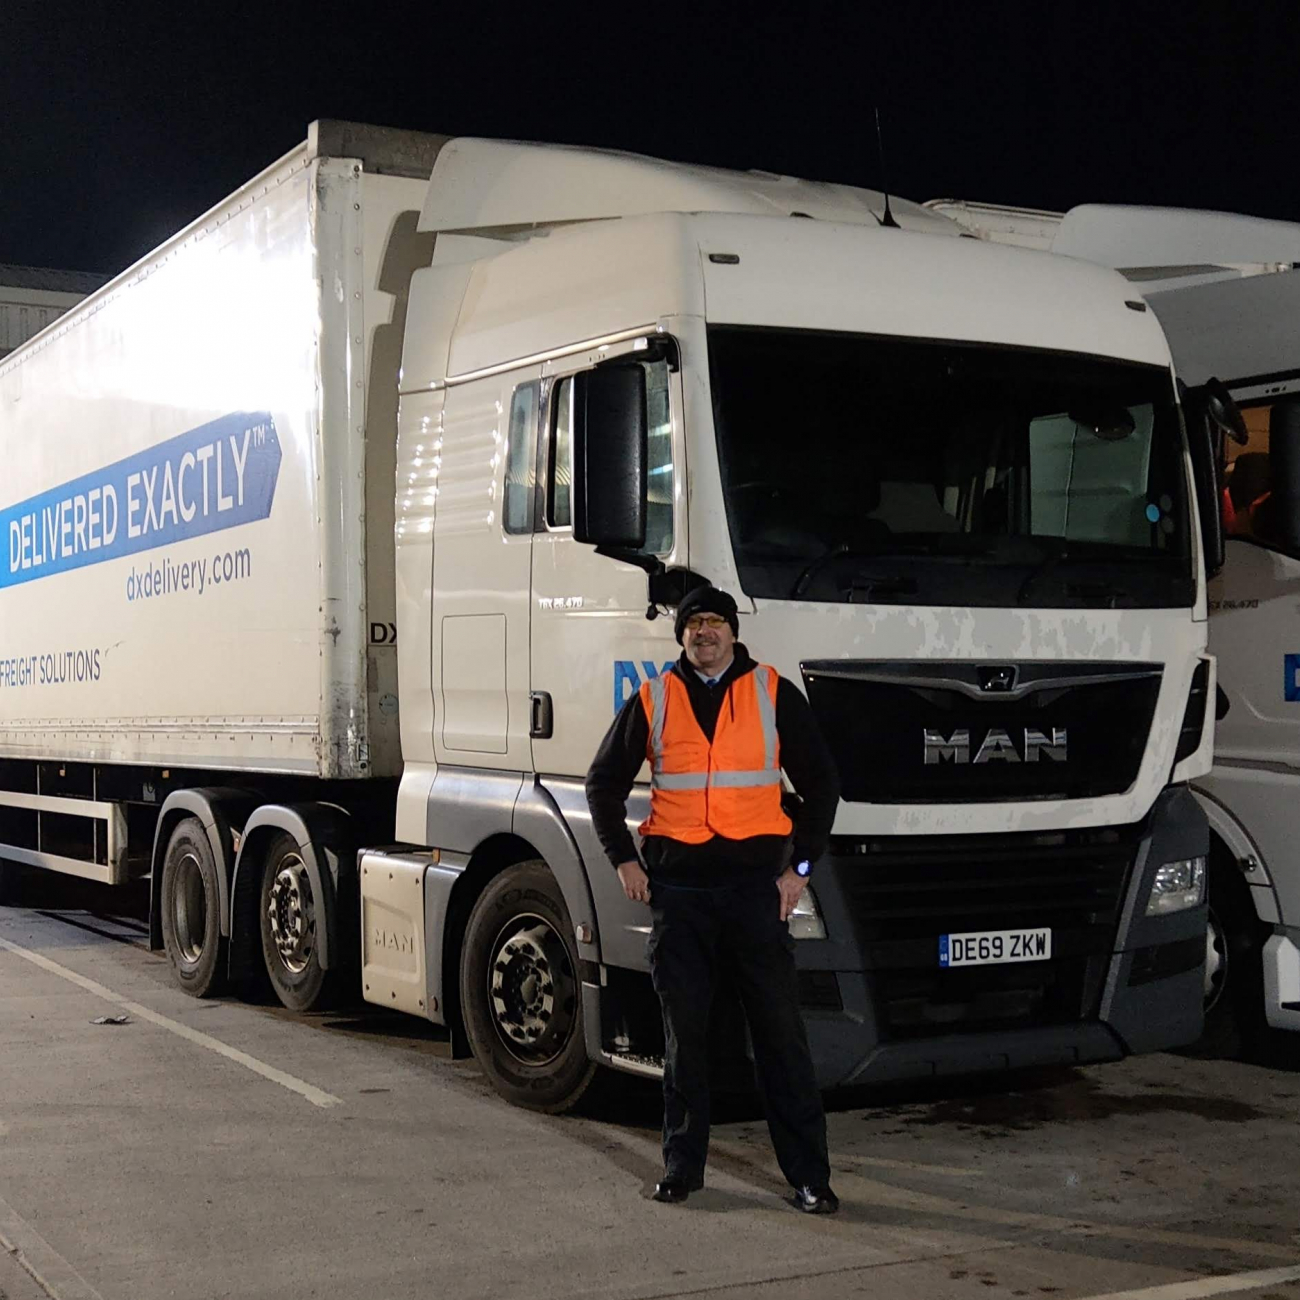 Jonathan stood in front of his lorry